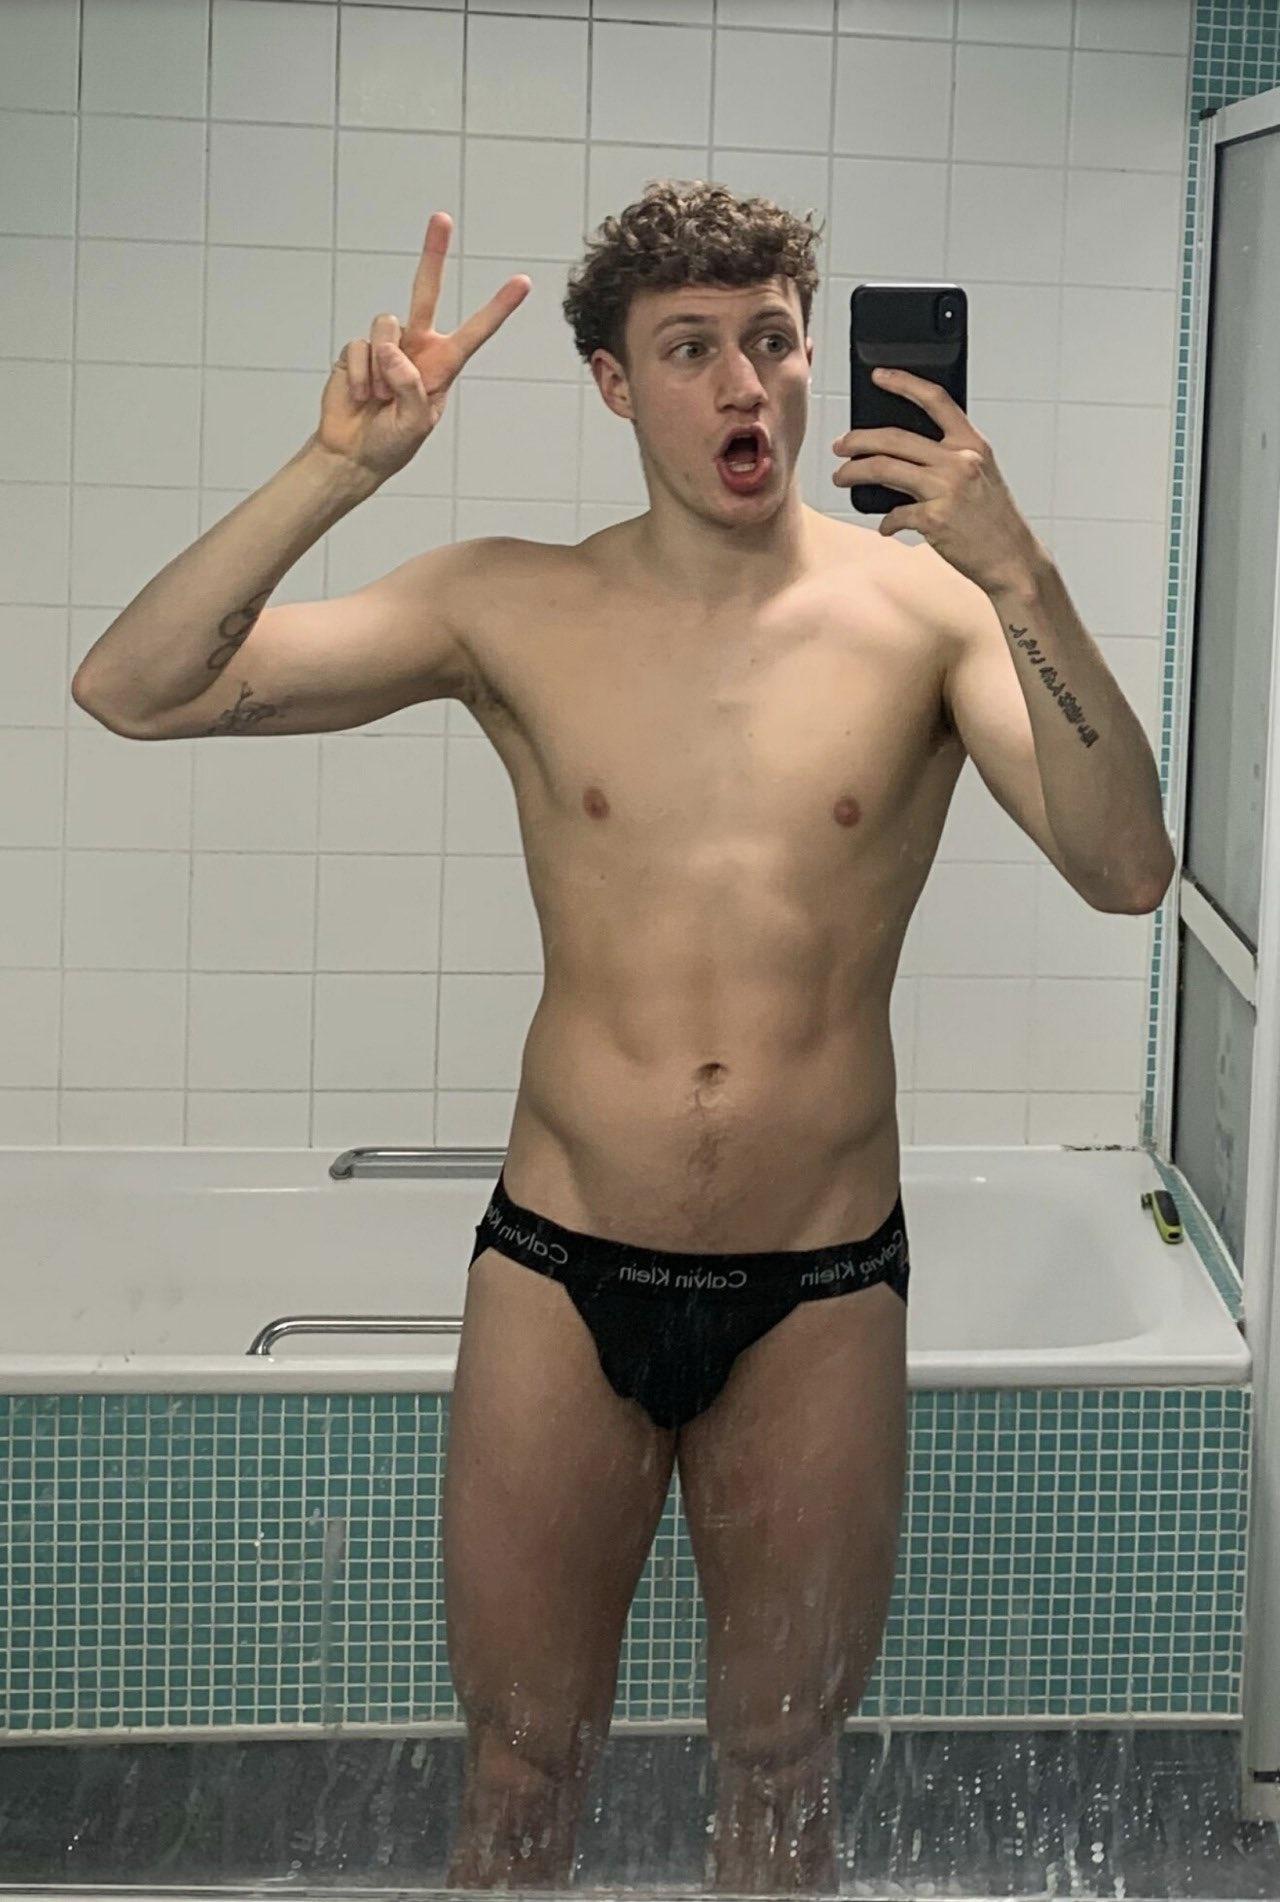 Noah Diver Porn - Dongs - No.451336 - Anyone have pics from Noah Williams OF? - male general